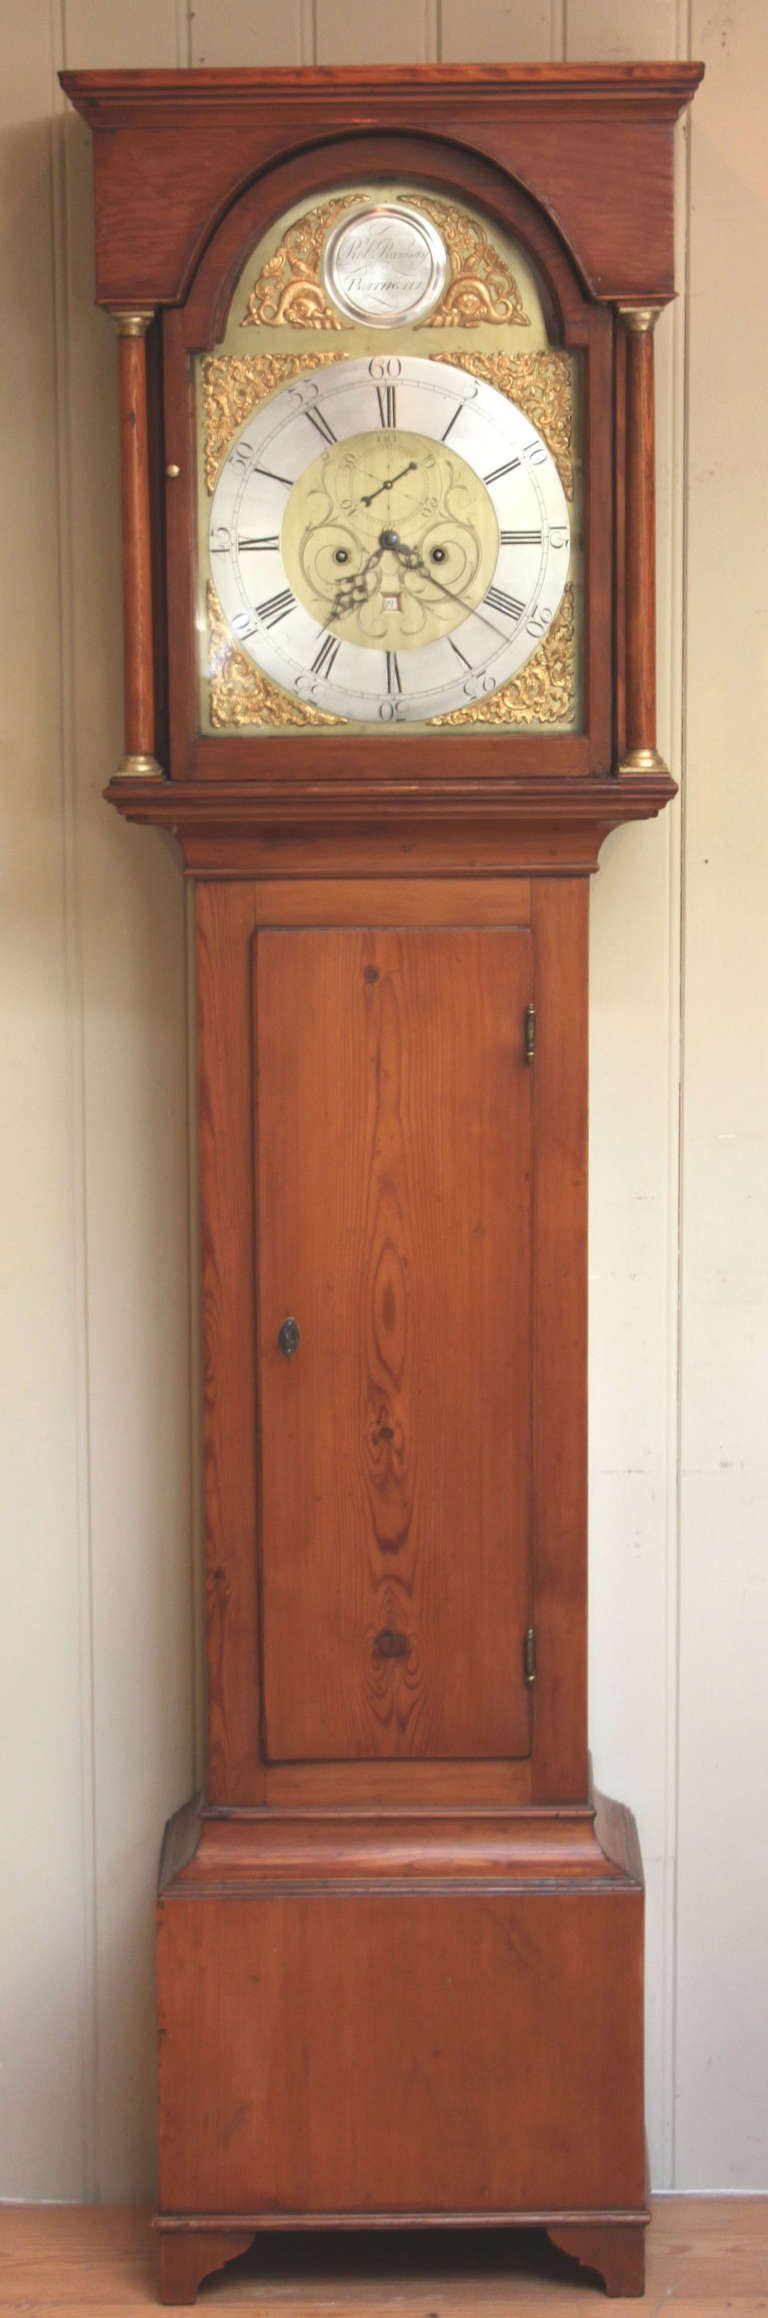 An original late 18th Century Scottish longcase clock. It has a flat top hood with a break arch door and side windows, a long door and bracket a feet base. The break arch brass dial has fine engraving with a silvered chapter ring and a name plate